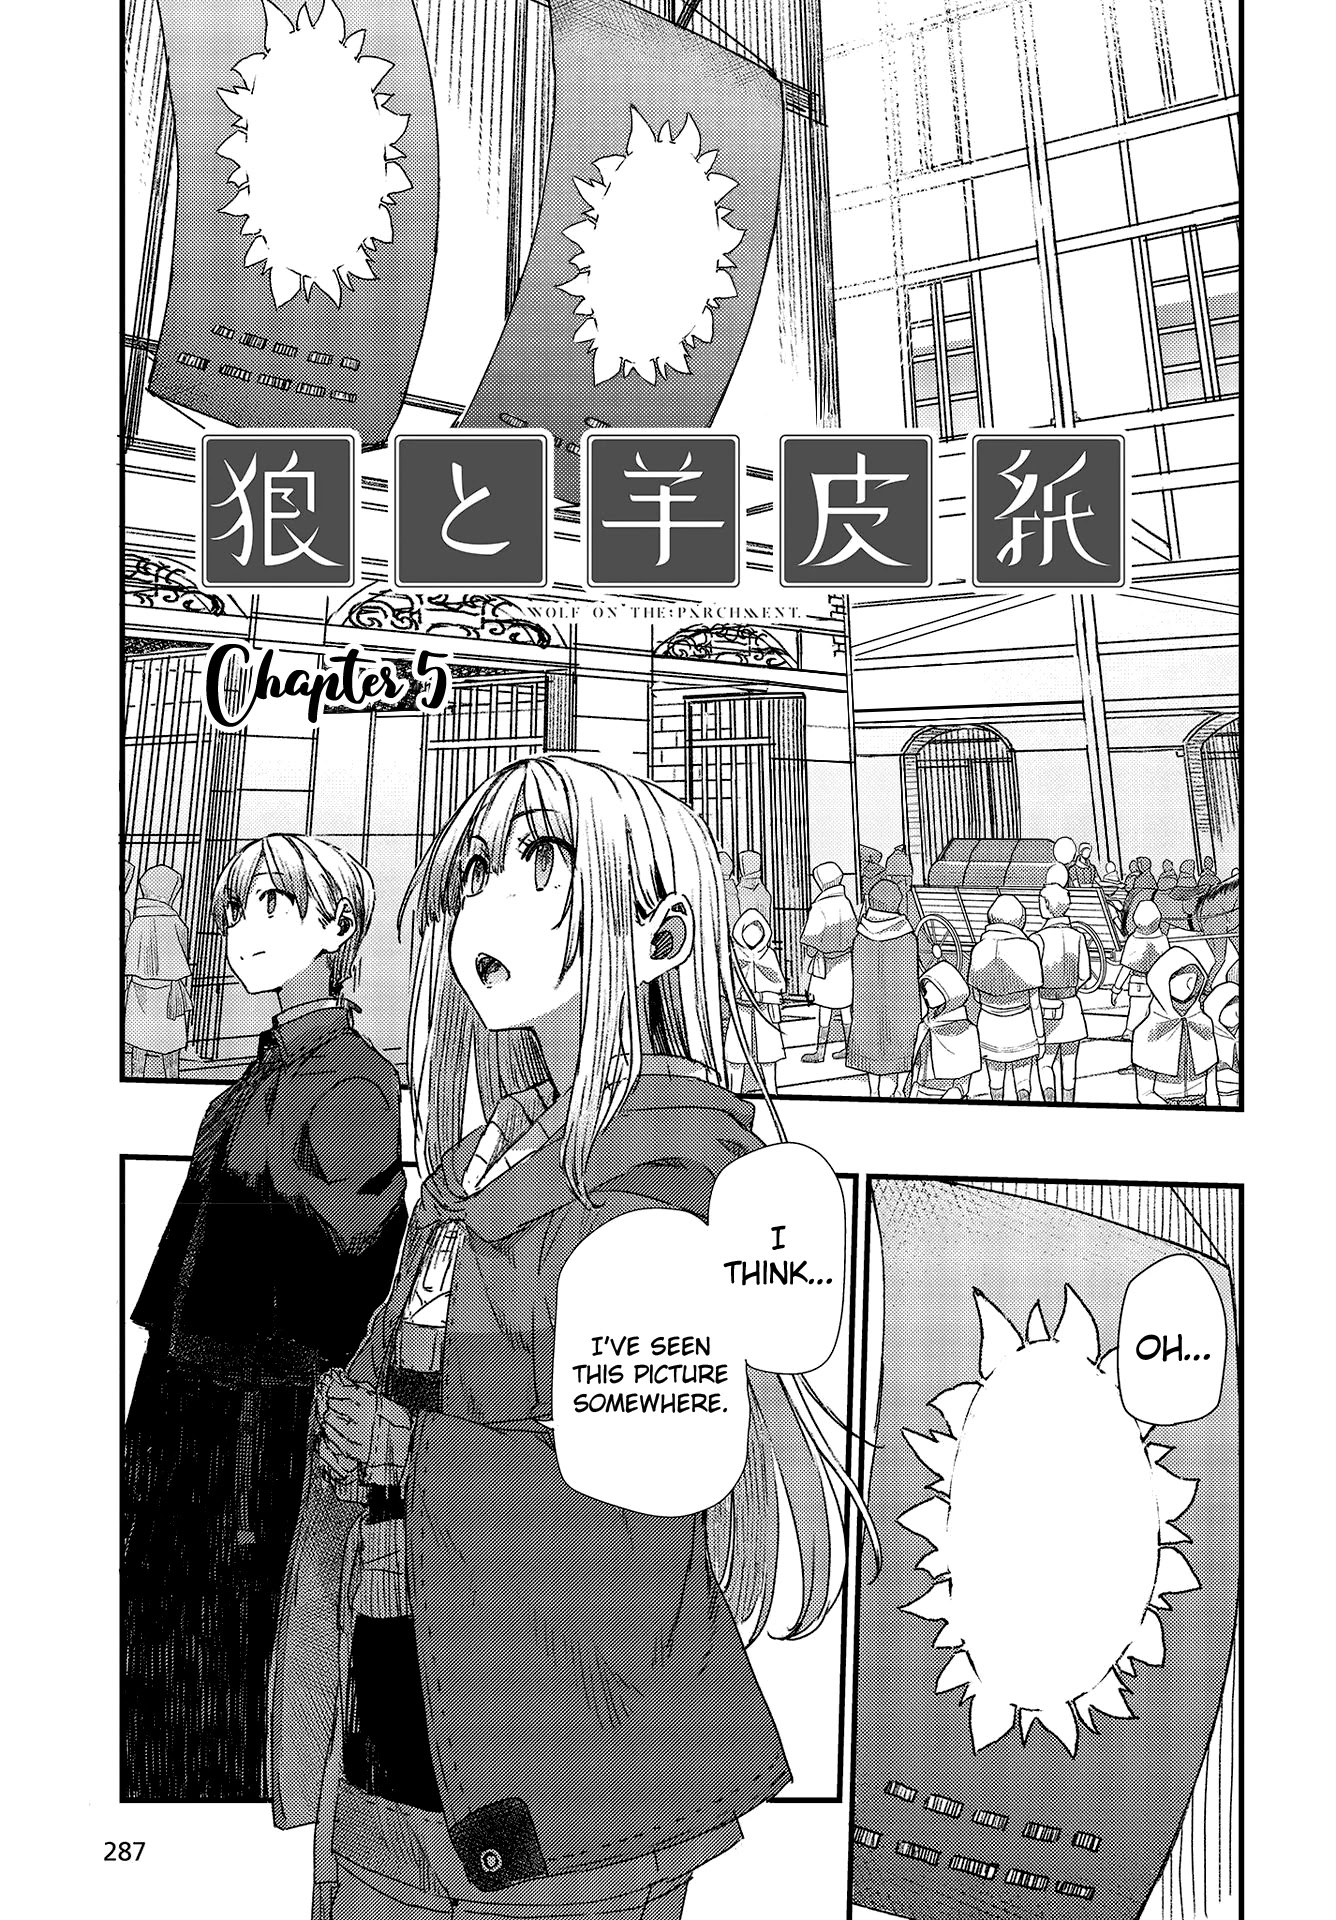 Wolf & Parchment: New Theory Spice & Wolf Chapter 5